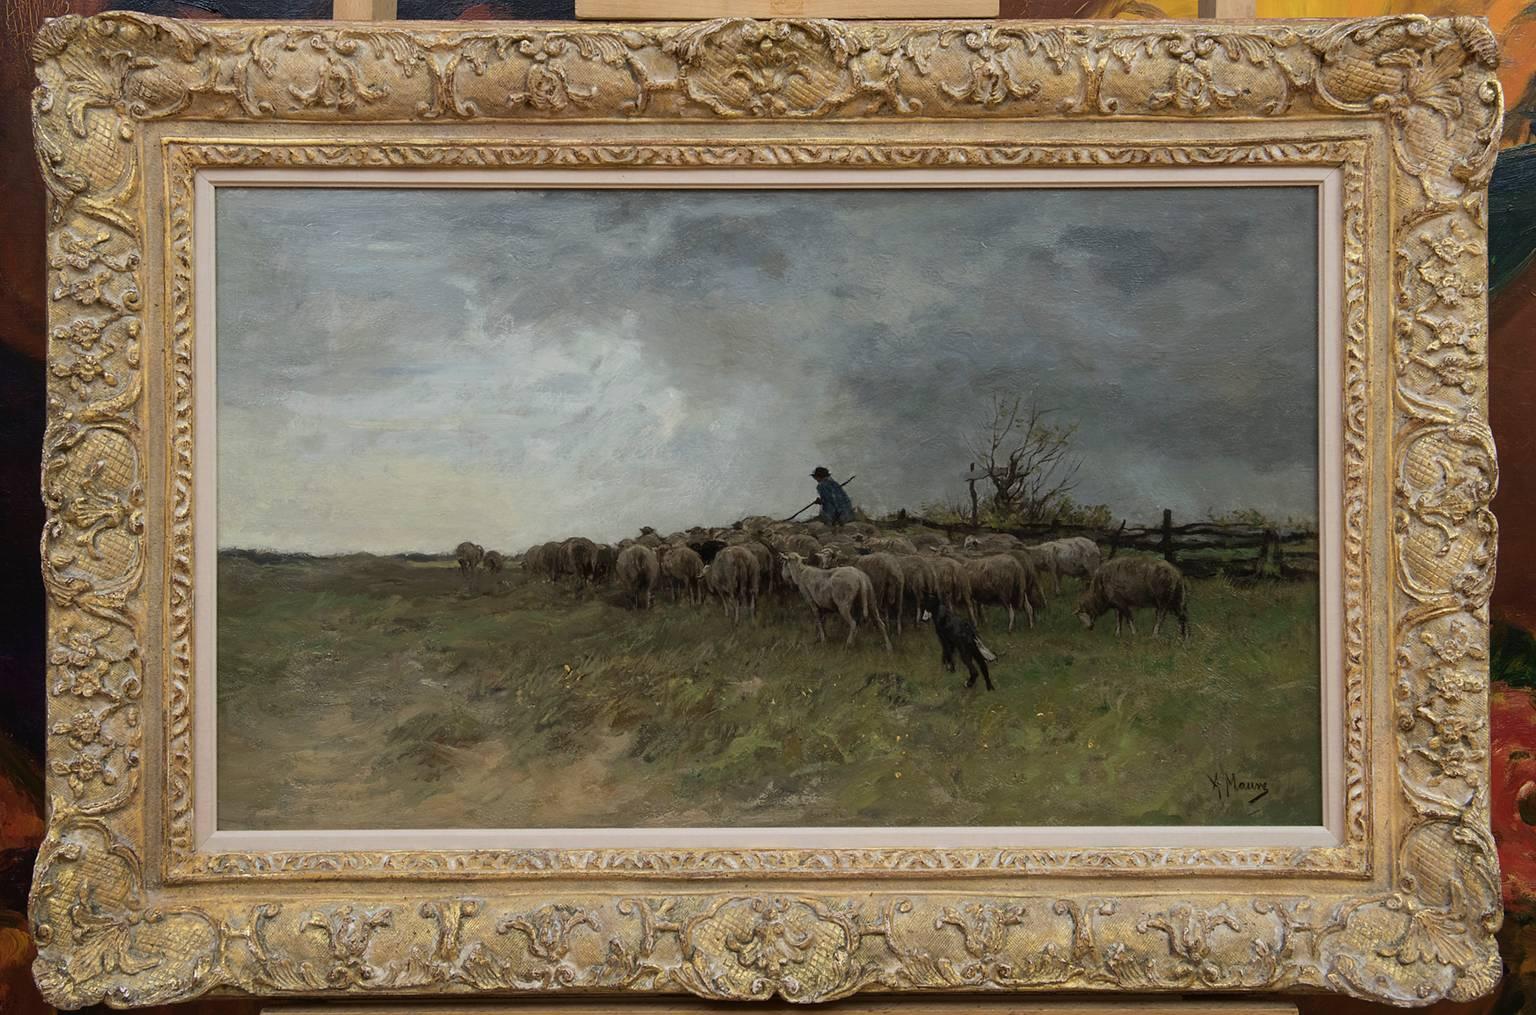 Landscape with shepherd and a flock of sheep - Painting by Anton Mauve